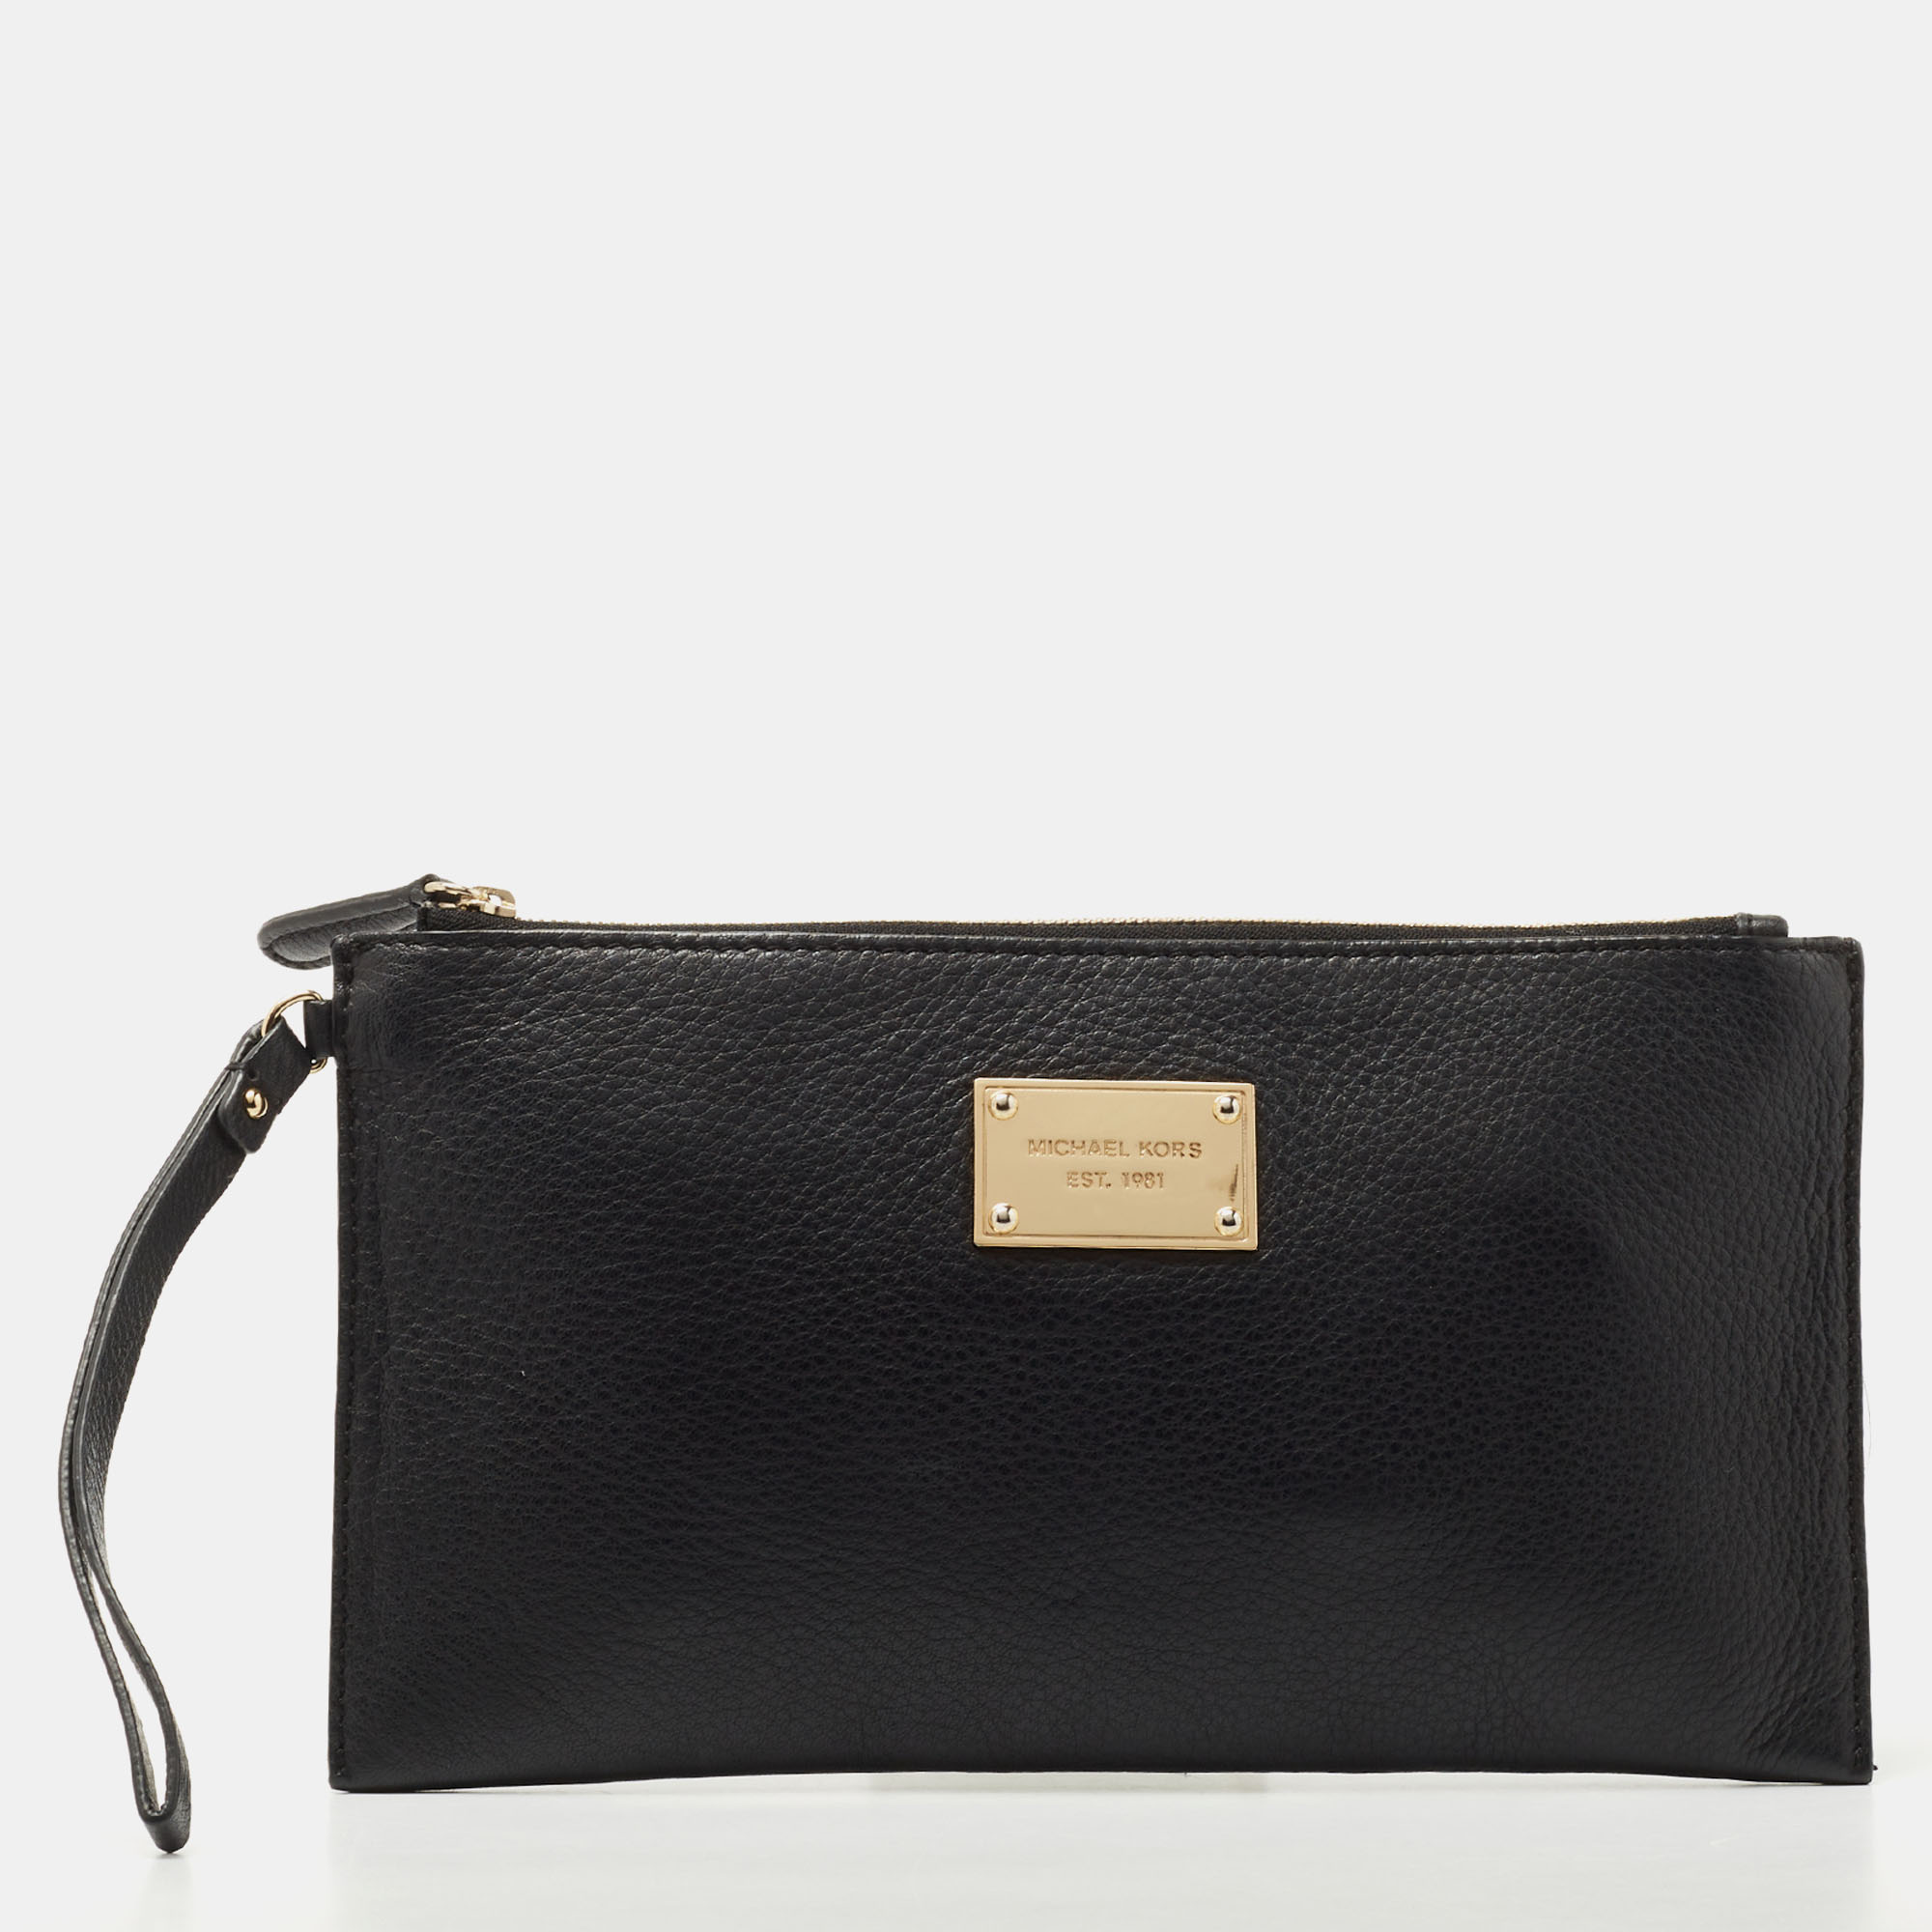 Pre-owned Michael Kors Black Leather Wristlet Pouch